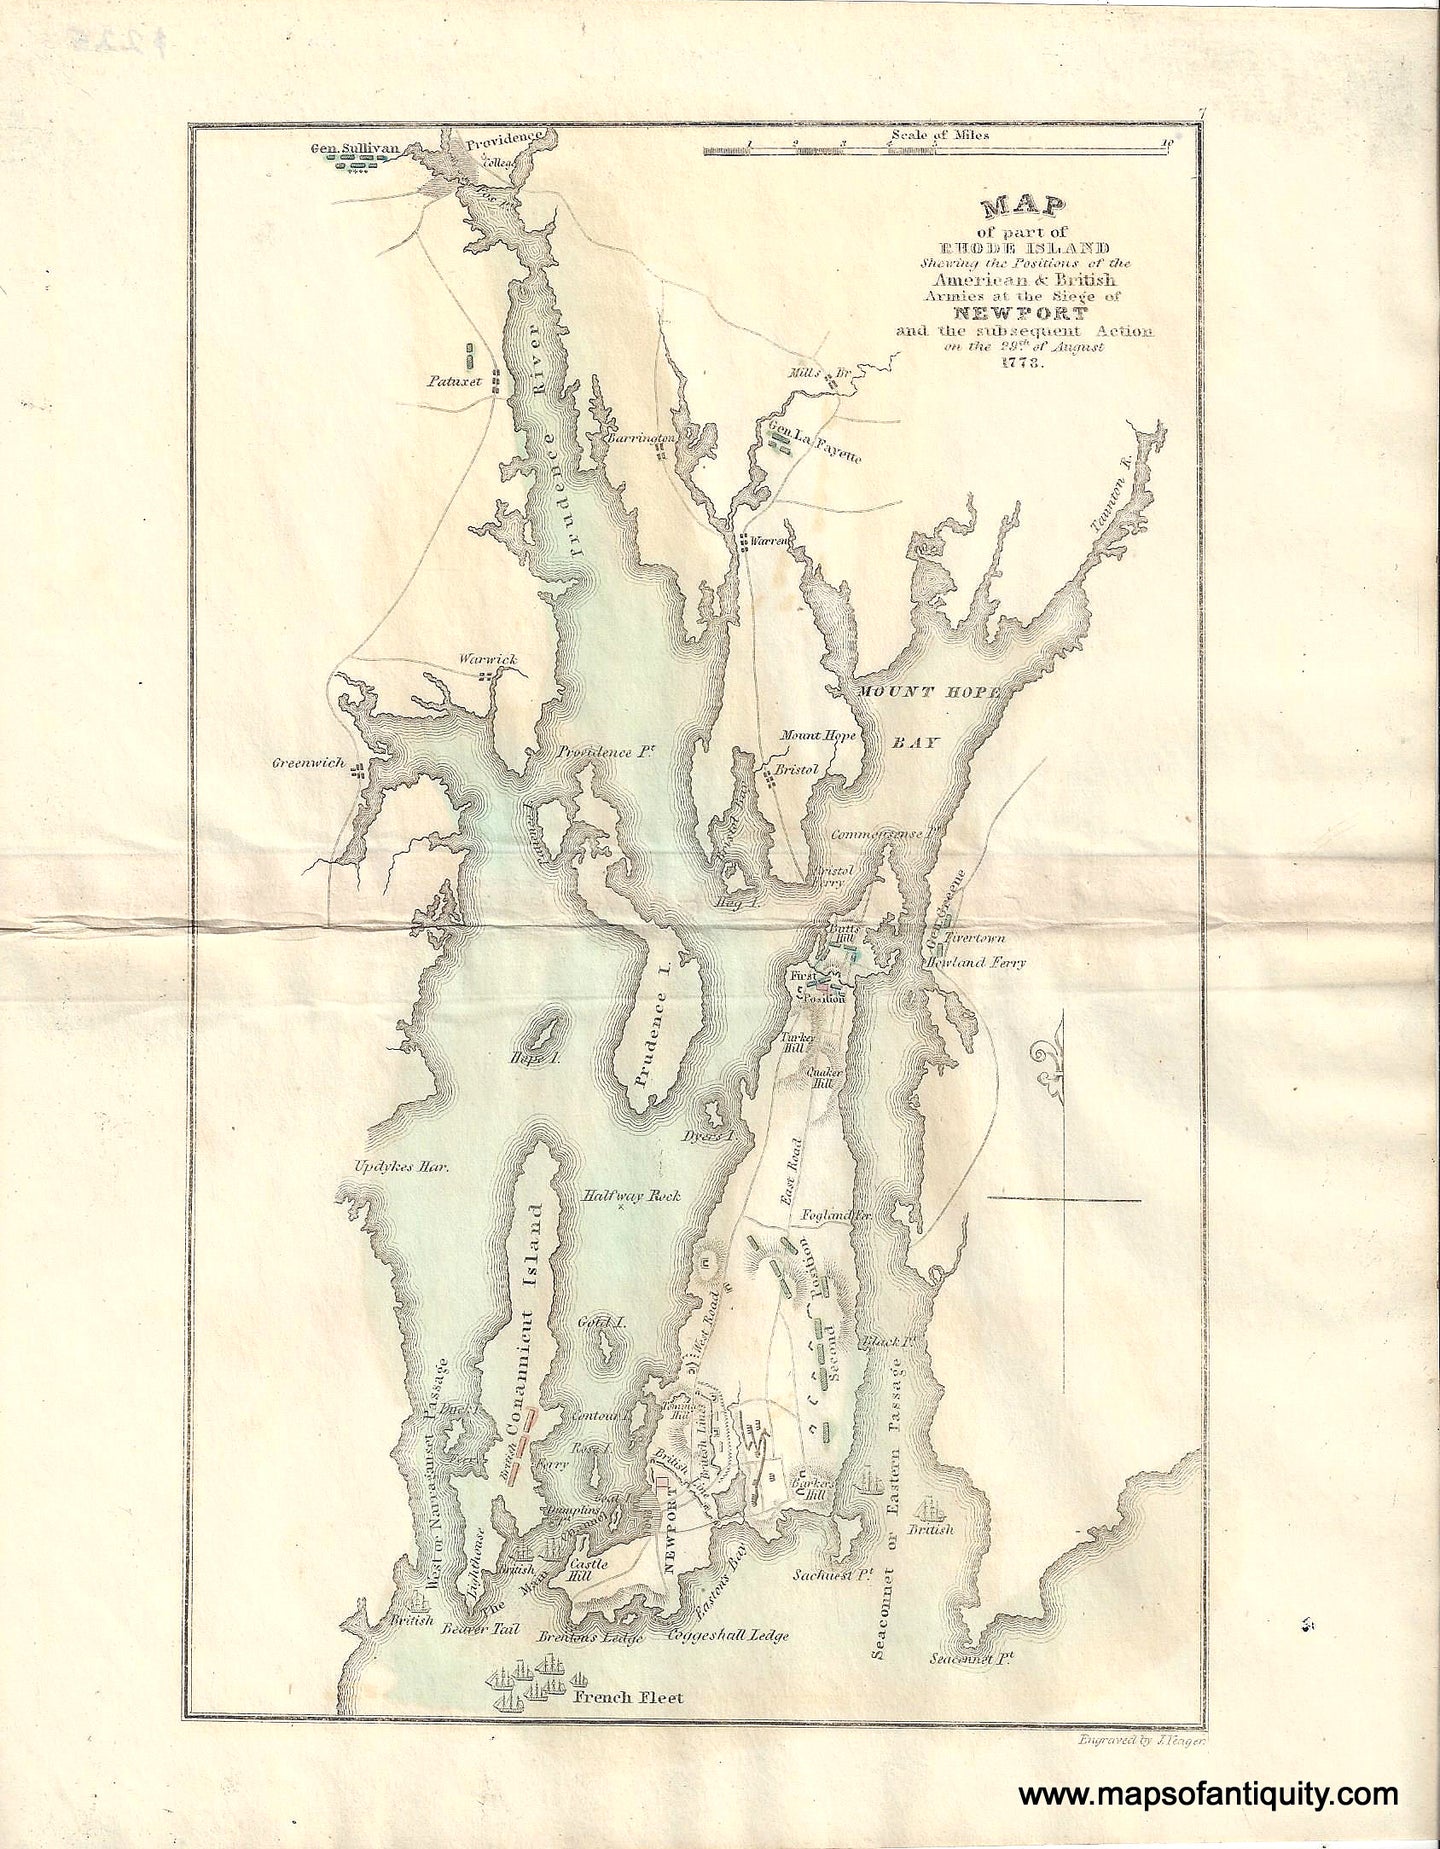 Antique-Hand-Colored-Map-A-Map-of-Part-of-Rhode-Island-Shewing-the-Positions-of-the-American-and-British-Armies-at-the-Siege-of-Newport-and-the-subsequent-Action-on-the-29th-of-August-1778.--United-States-Rhode-Island-1827-Marshall-Maps-Of-Antiquity-1800s-19th-century